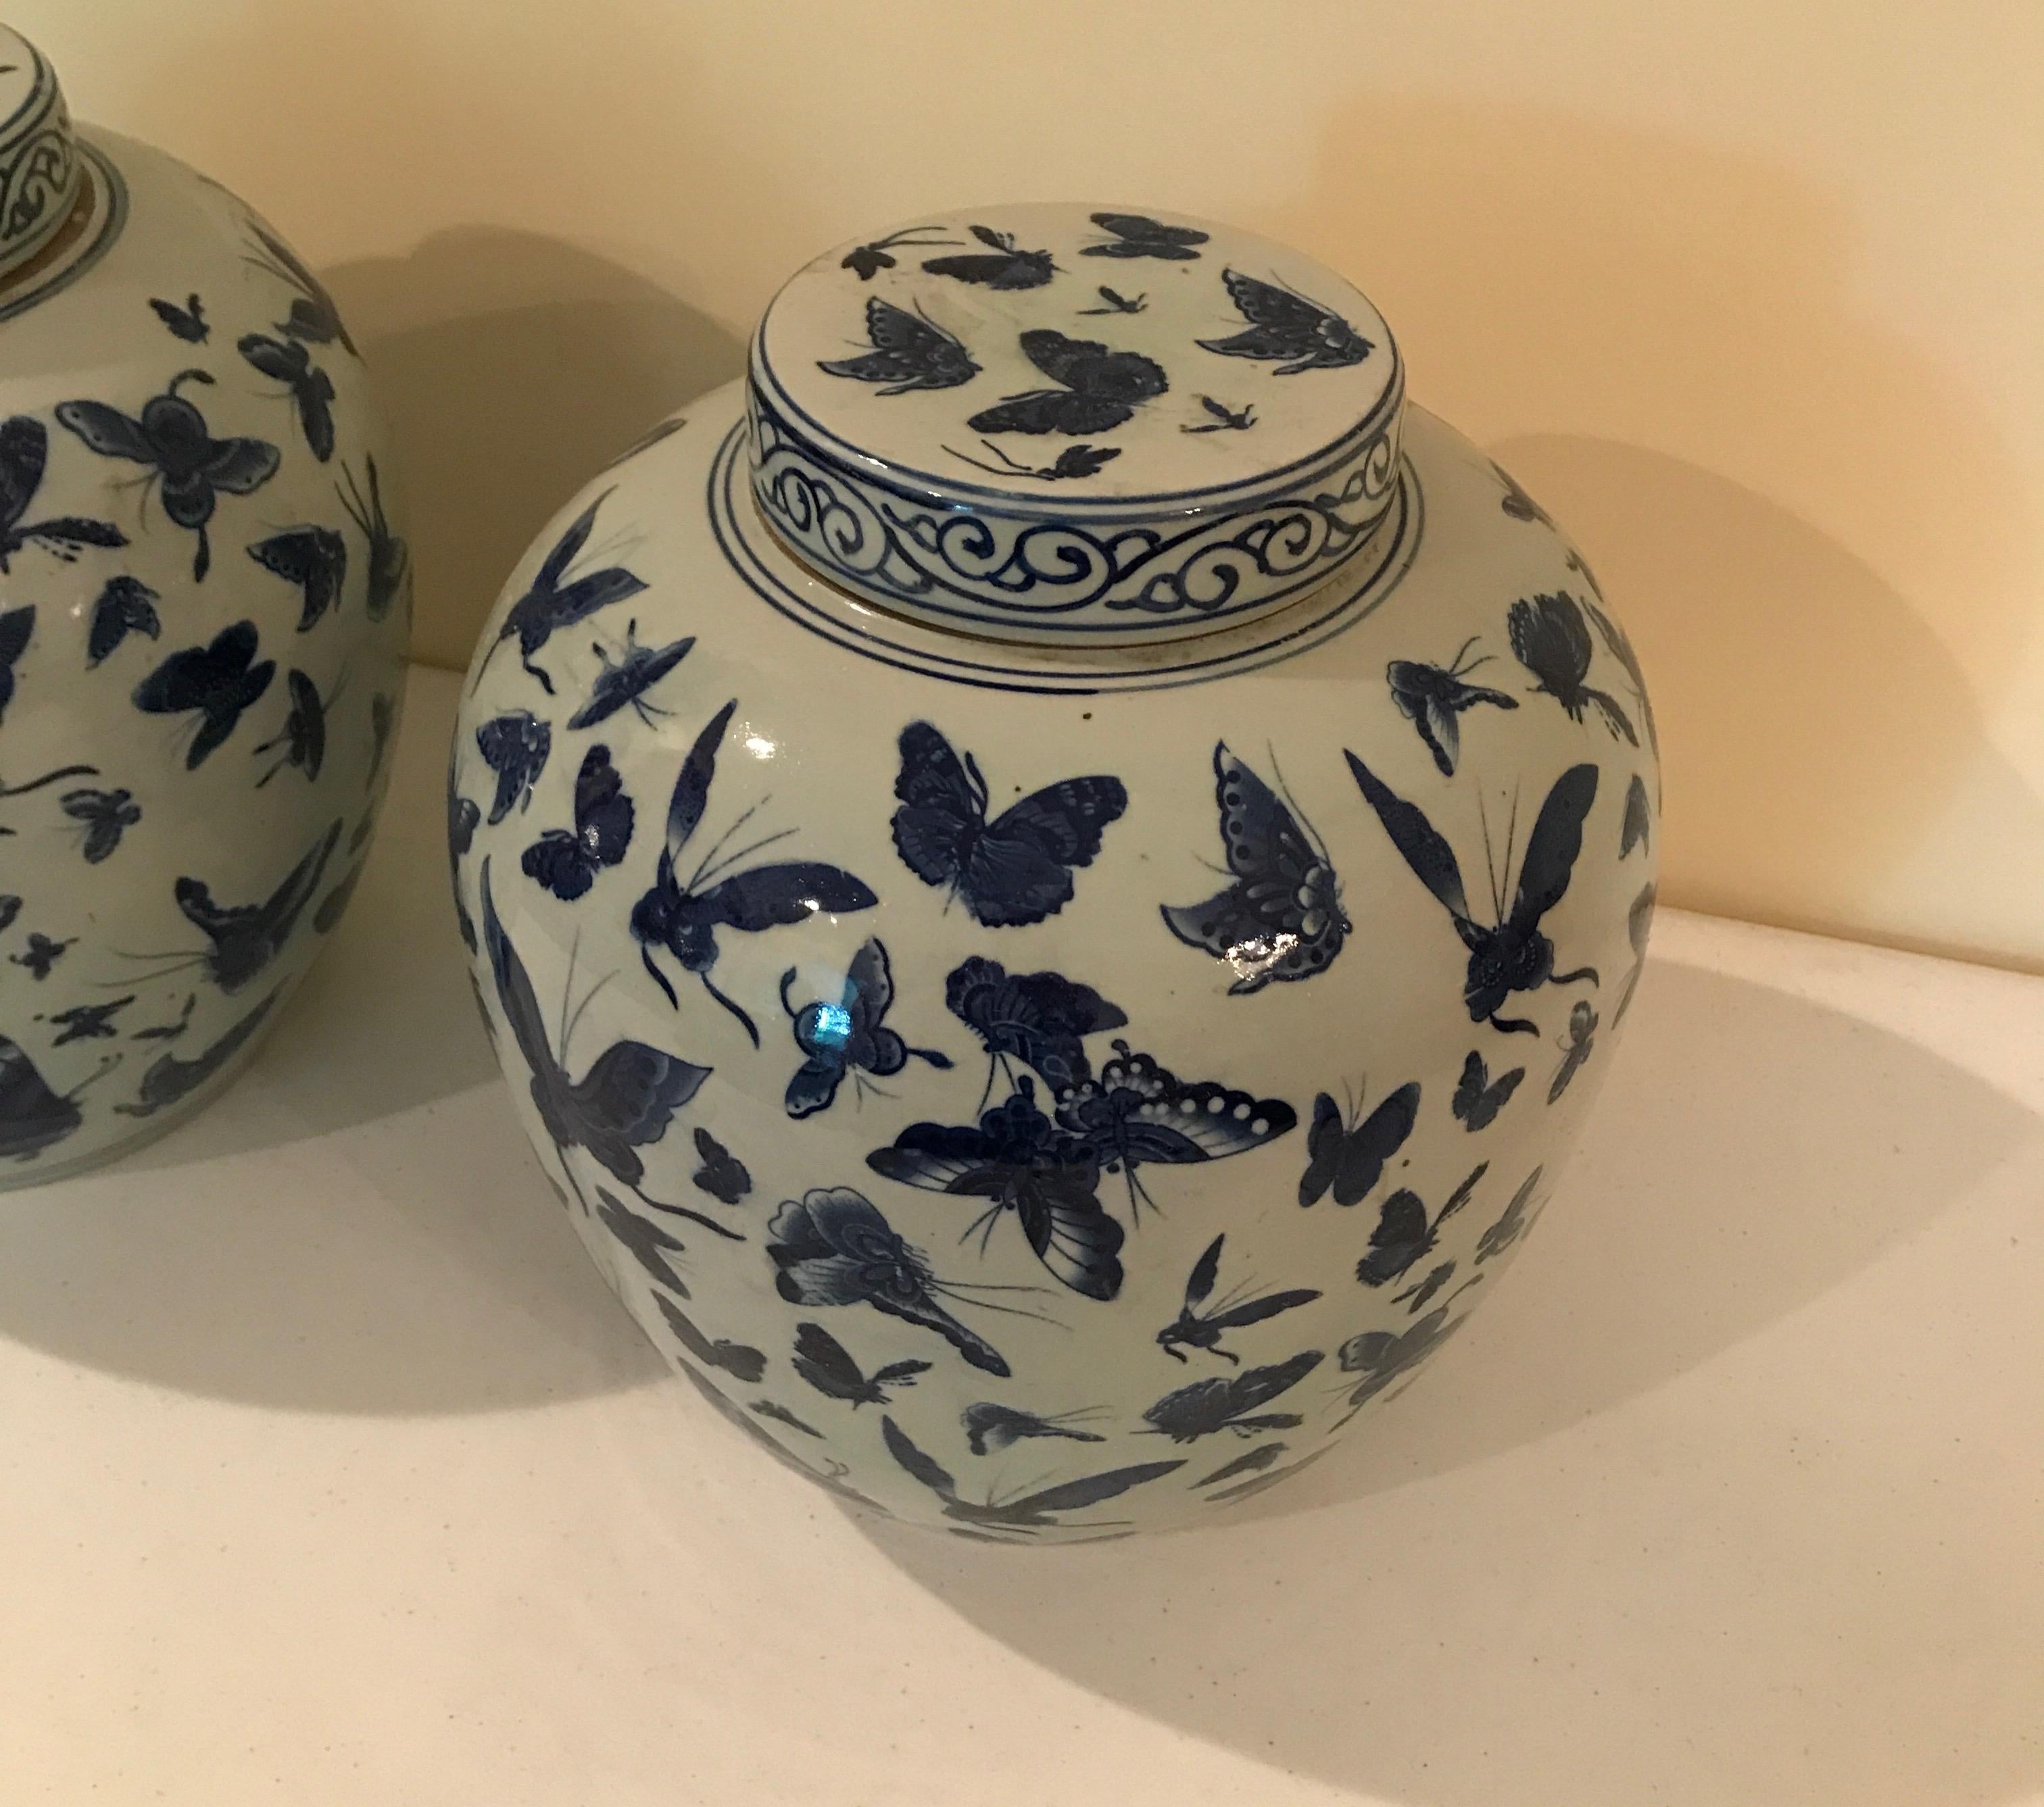 Pair of Chinese ginger jars with lids in a butterfly motif.